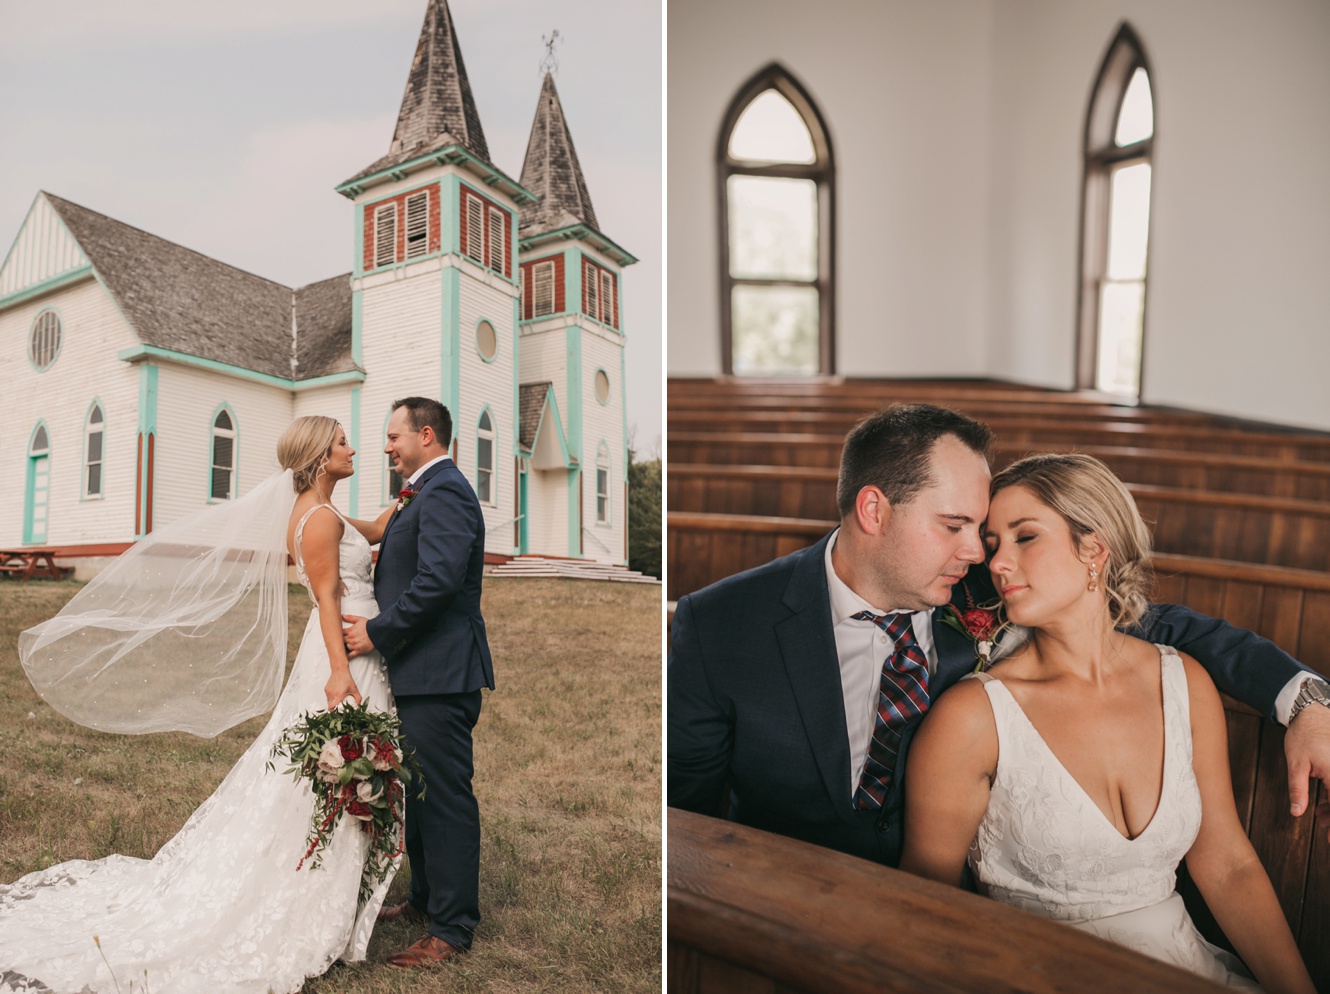 Starr Mercer is a wedding and engagement photographer based on the Saskatchewan Prairies and is available for travel. Timeless Summer Wedding at Bekevar Church.